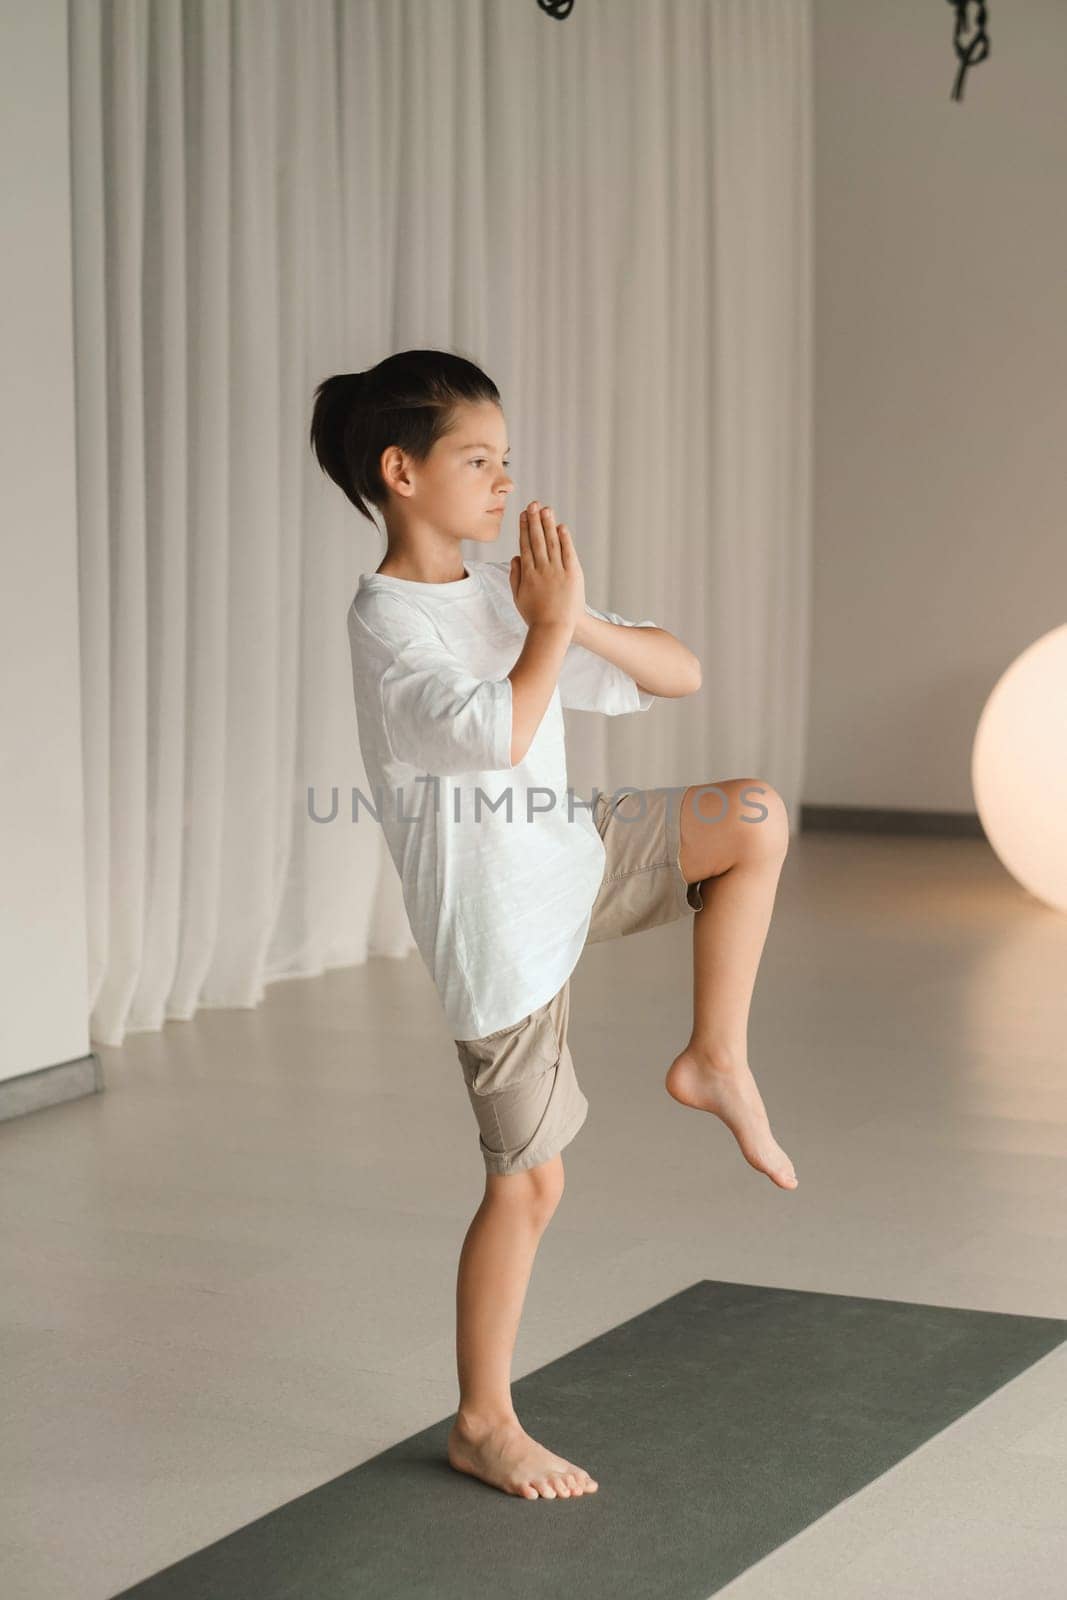 A child practices yoga poses indoors. Children's yoga by Lobachad